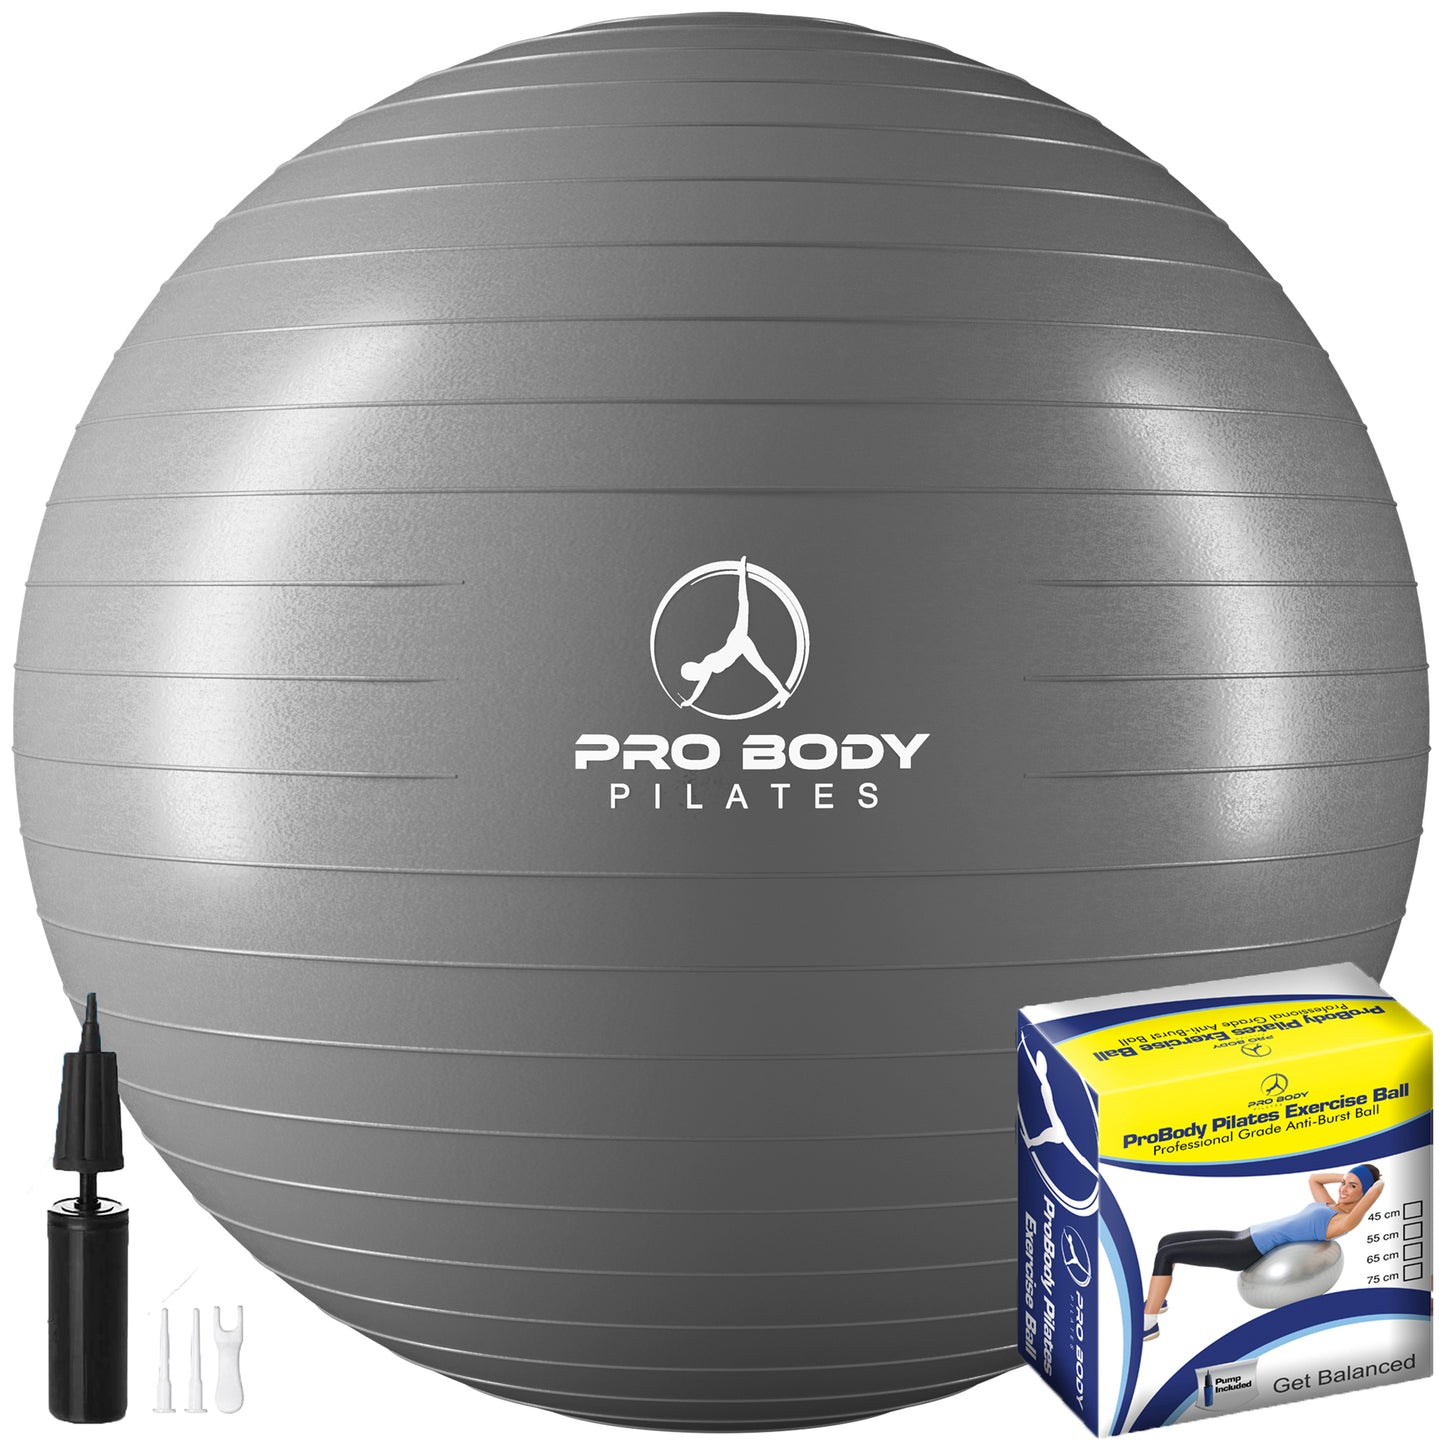 Yoga Ball for Pregnancy, Fitness, Balance, Workout at Home, Office and Physical Therapy (Silver)